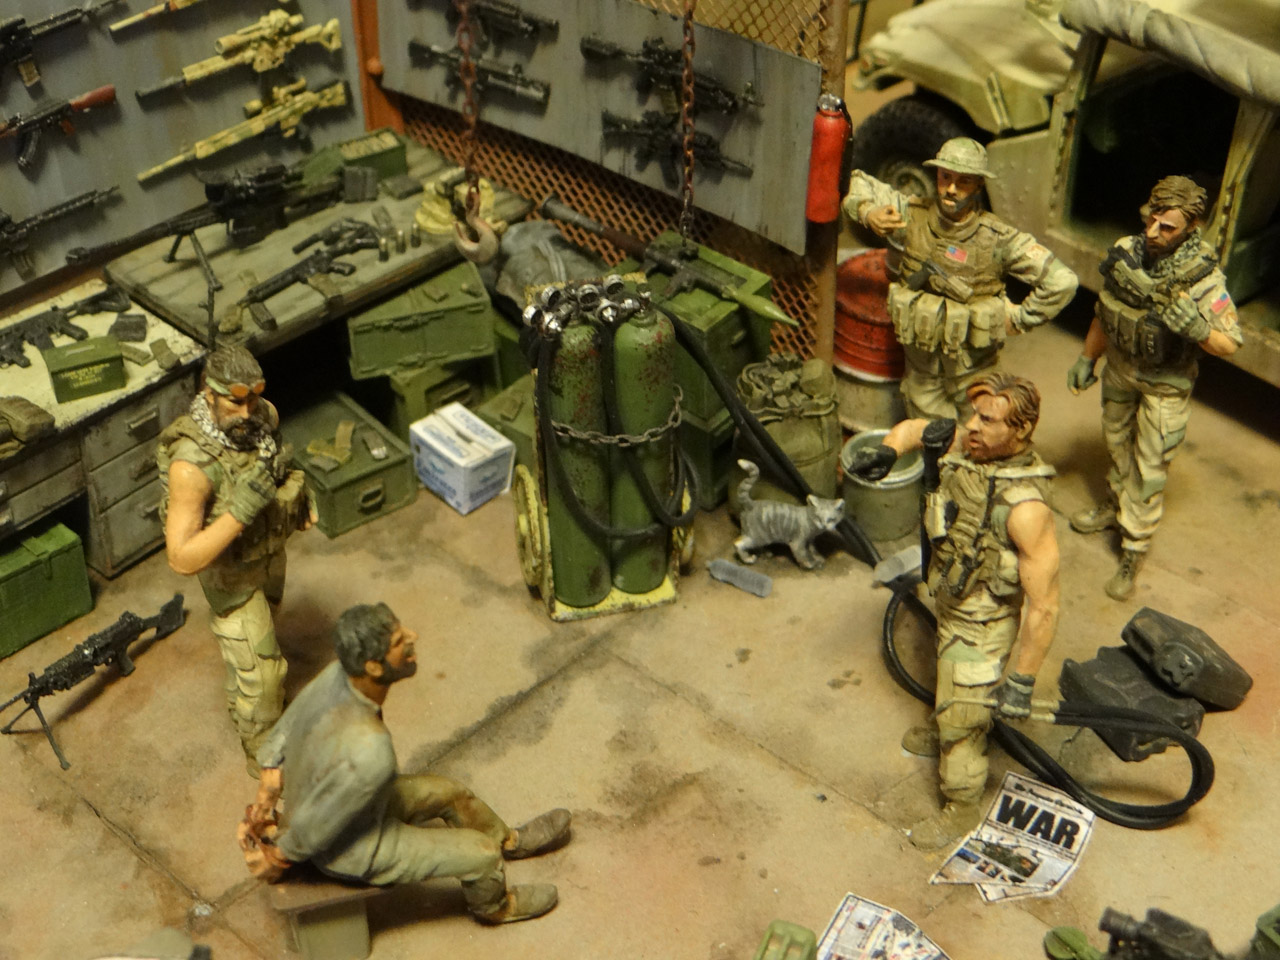 Dioramas and Vignettes: Enforcement to democracy, photo #7